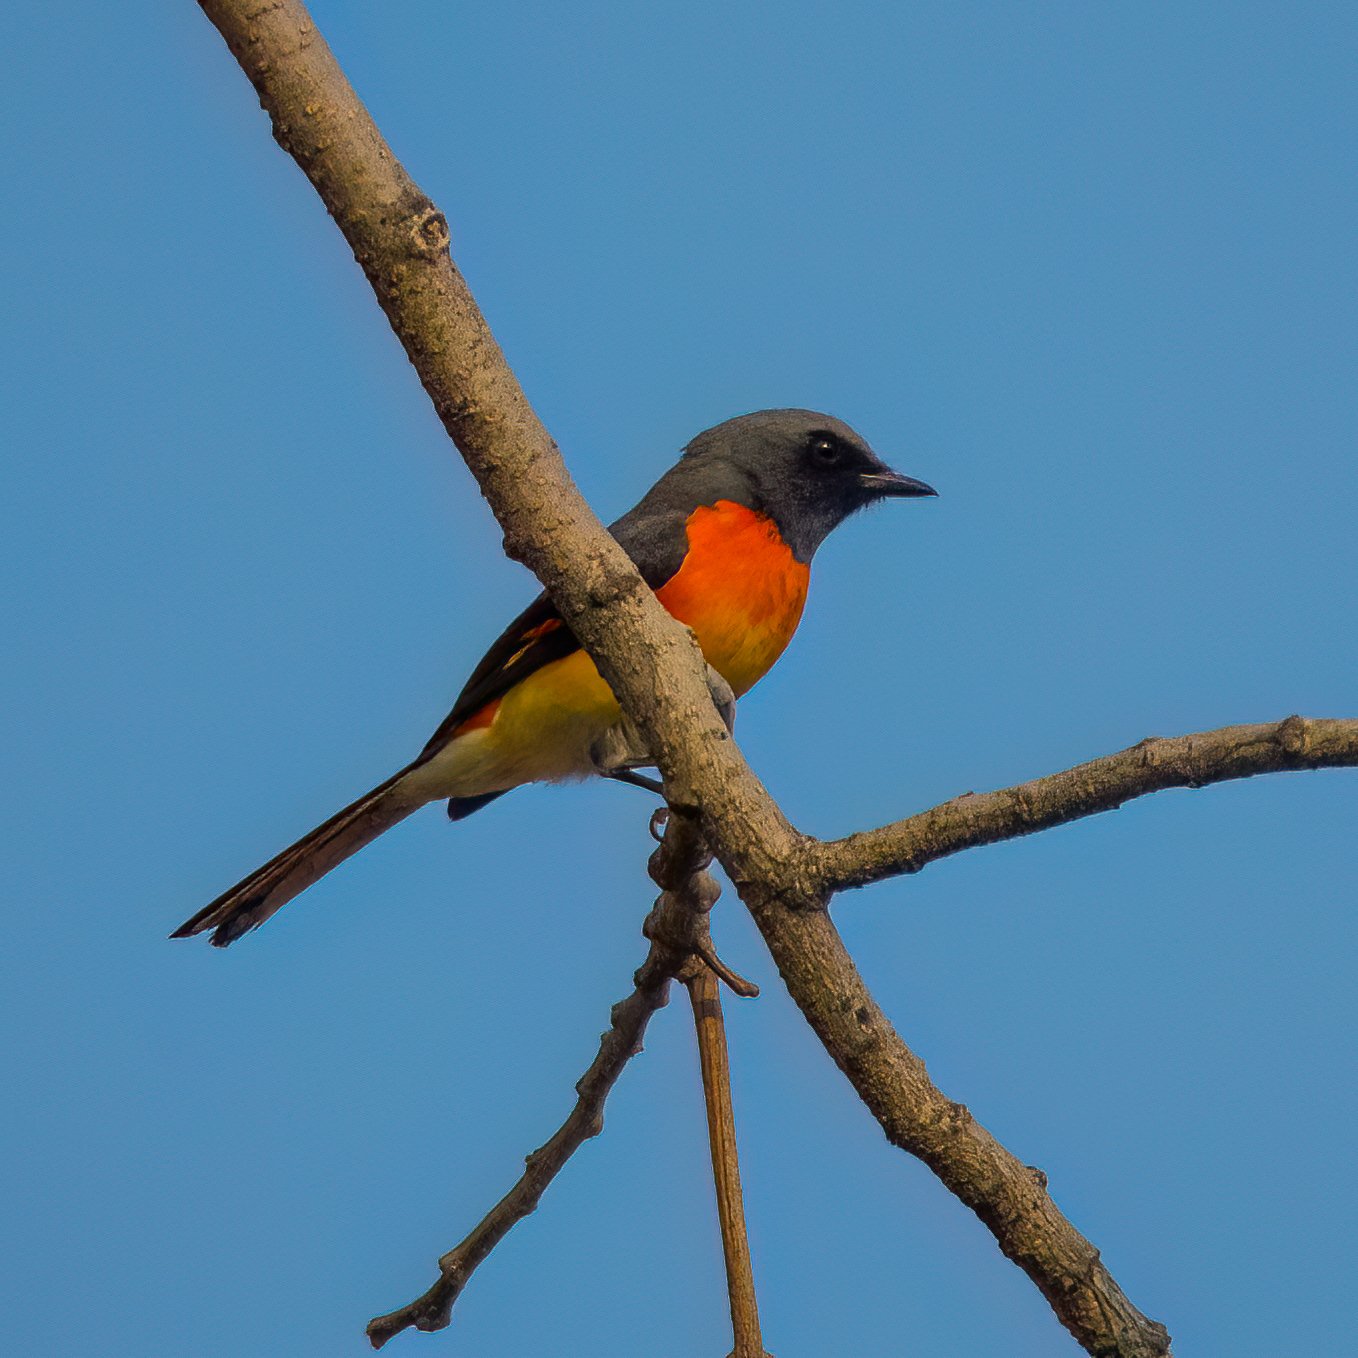  I beieve that this is a Small Minivet. It was a new one for me, and quite pretty. 